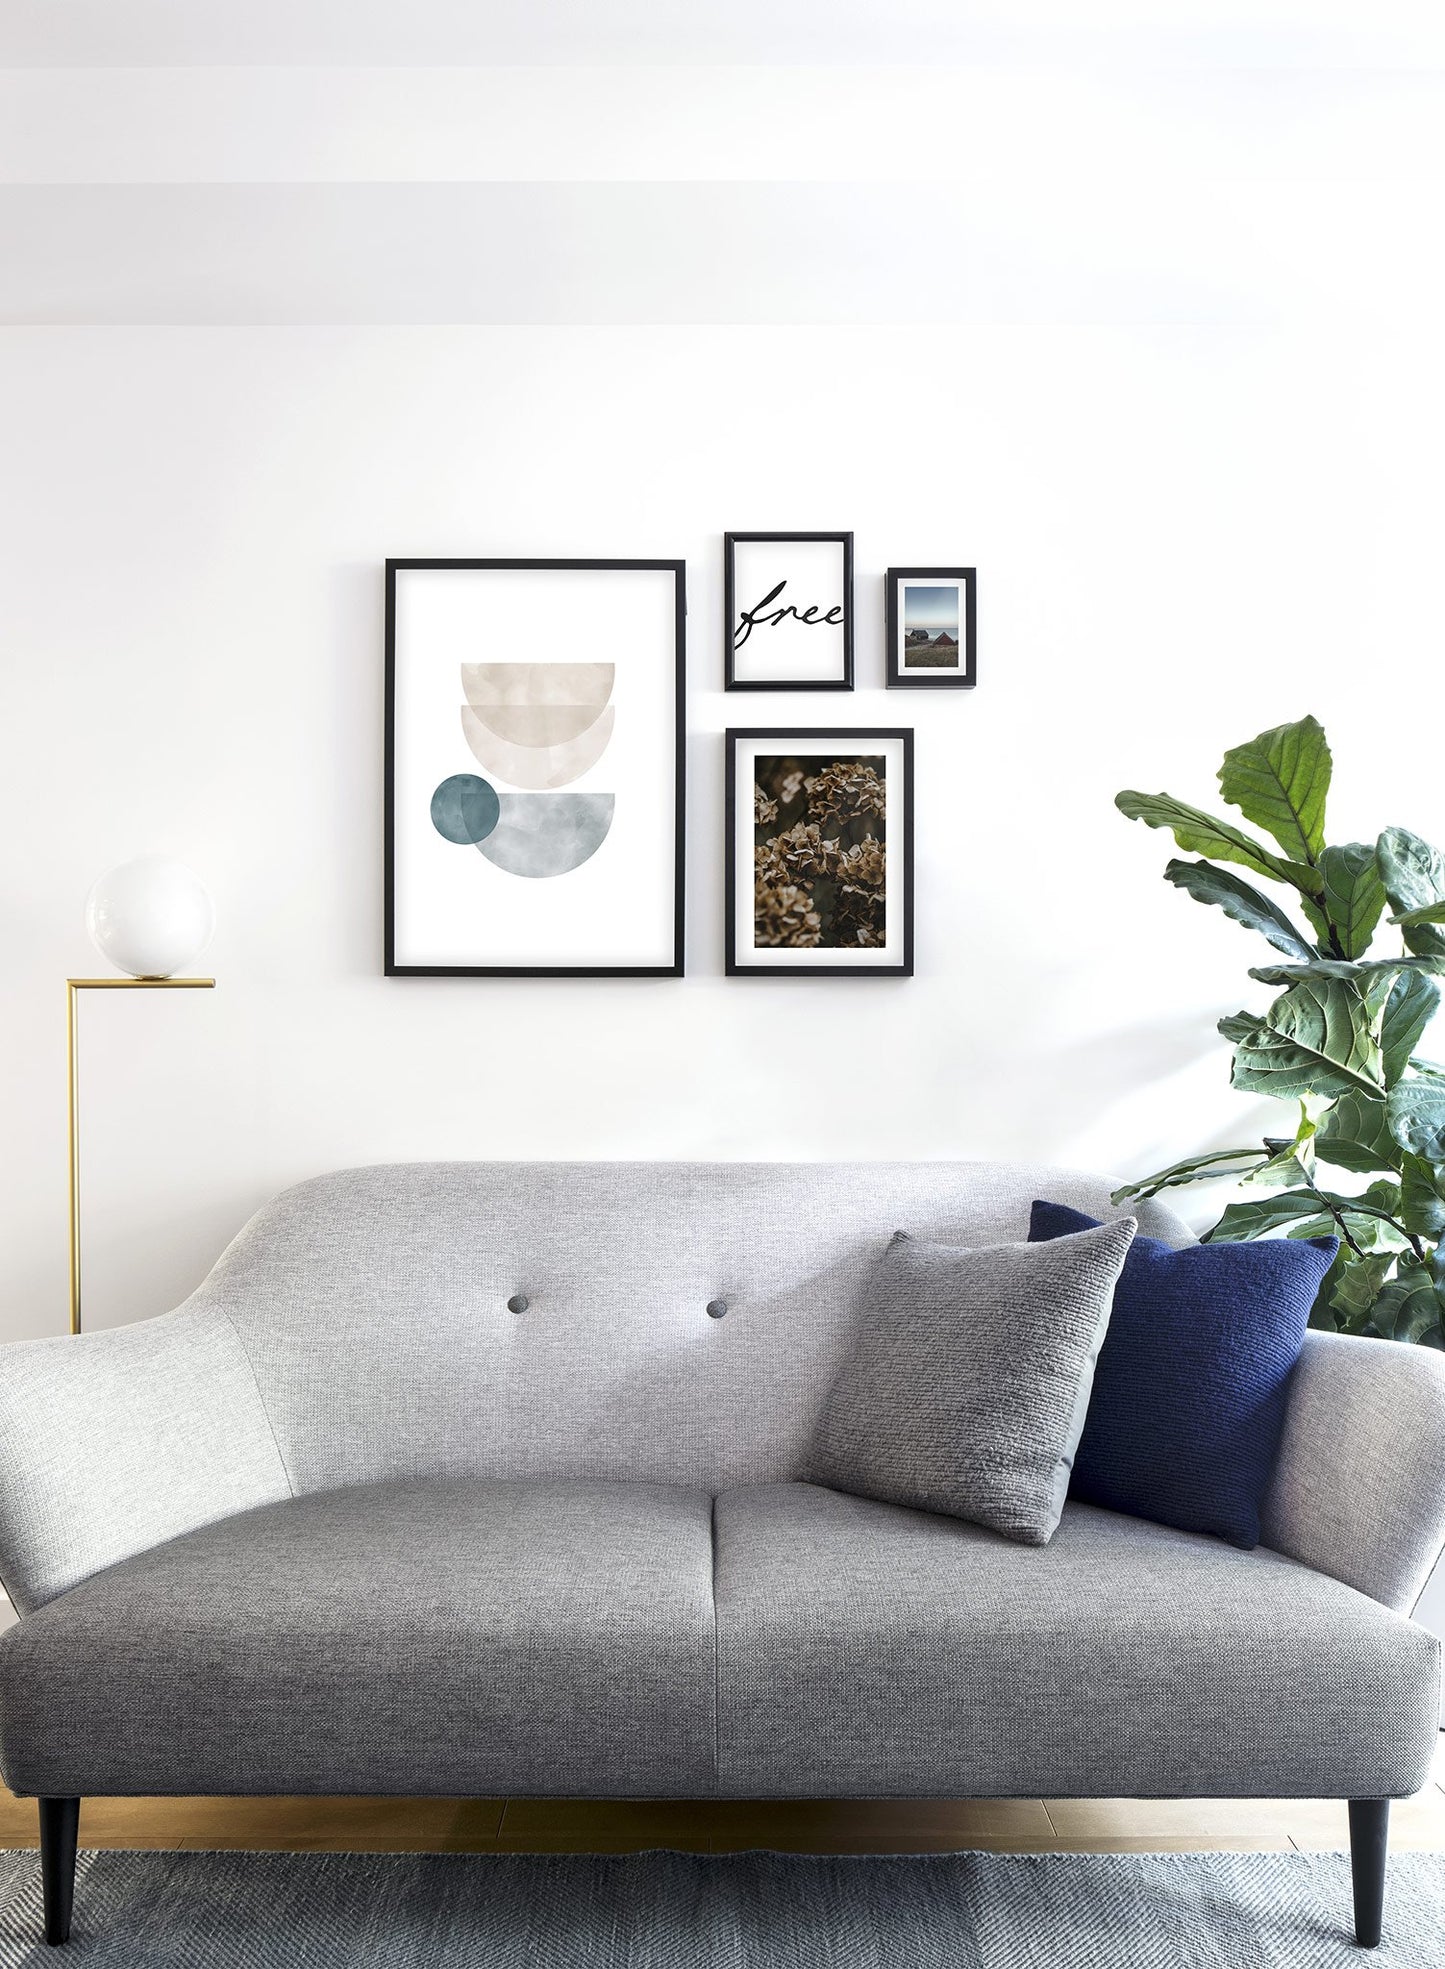 Modern minimalist poster by Opposite Wall with abstract illustration of watercolour bowl shapes - Lifestyle Gallery - Living Room